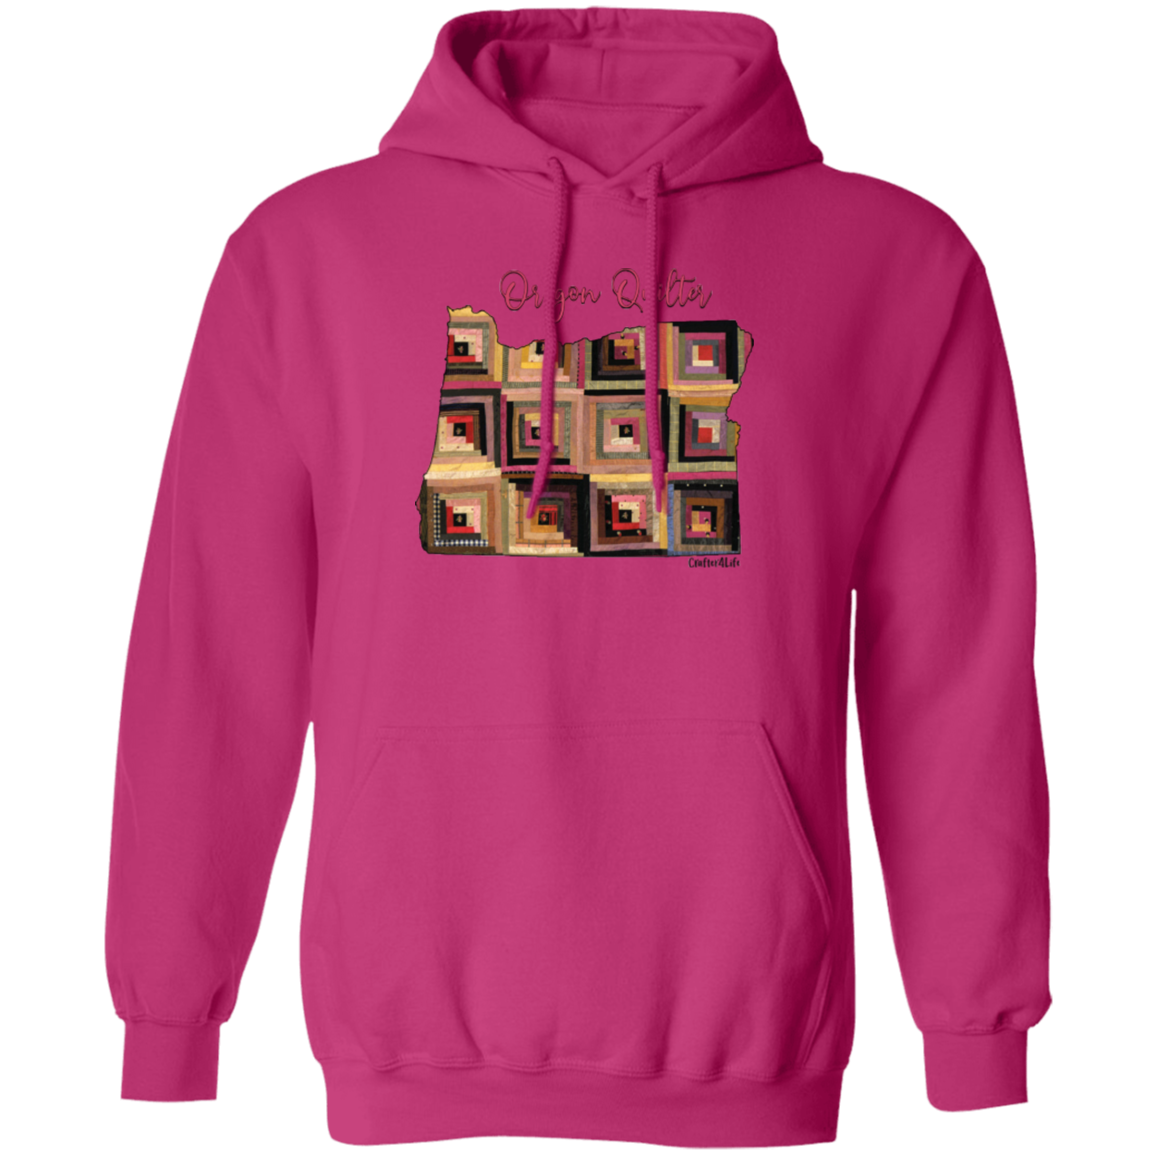 Oregon Quilter Pullover Hoodie, Gift for Quilting Friends and Family